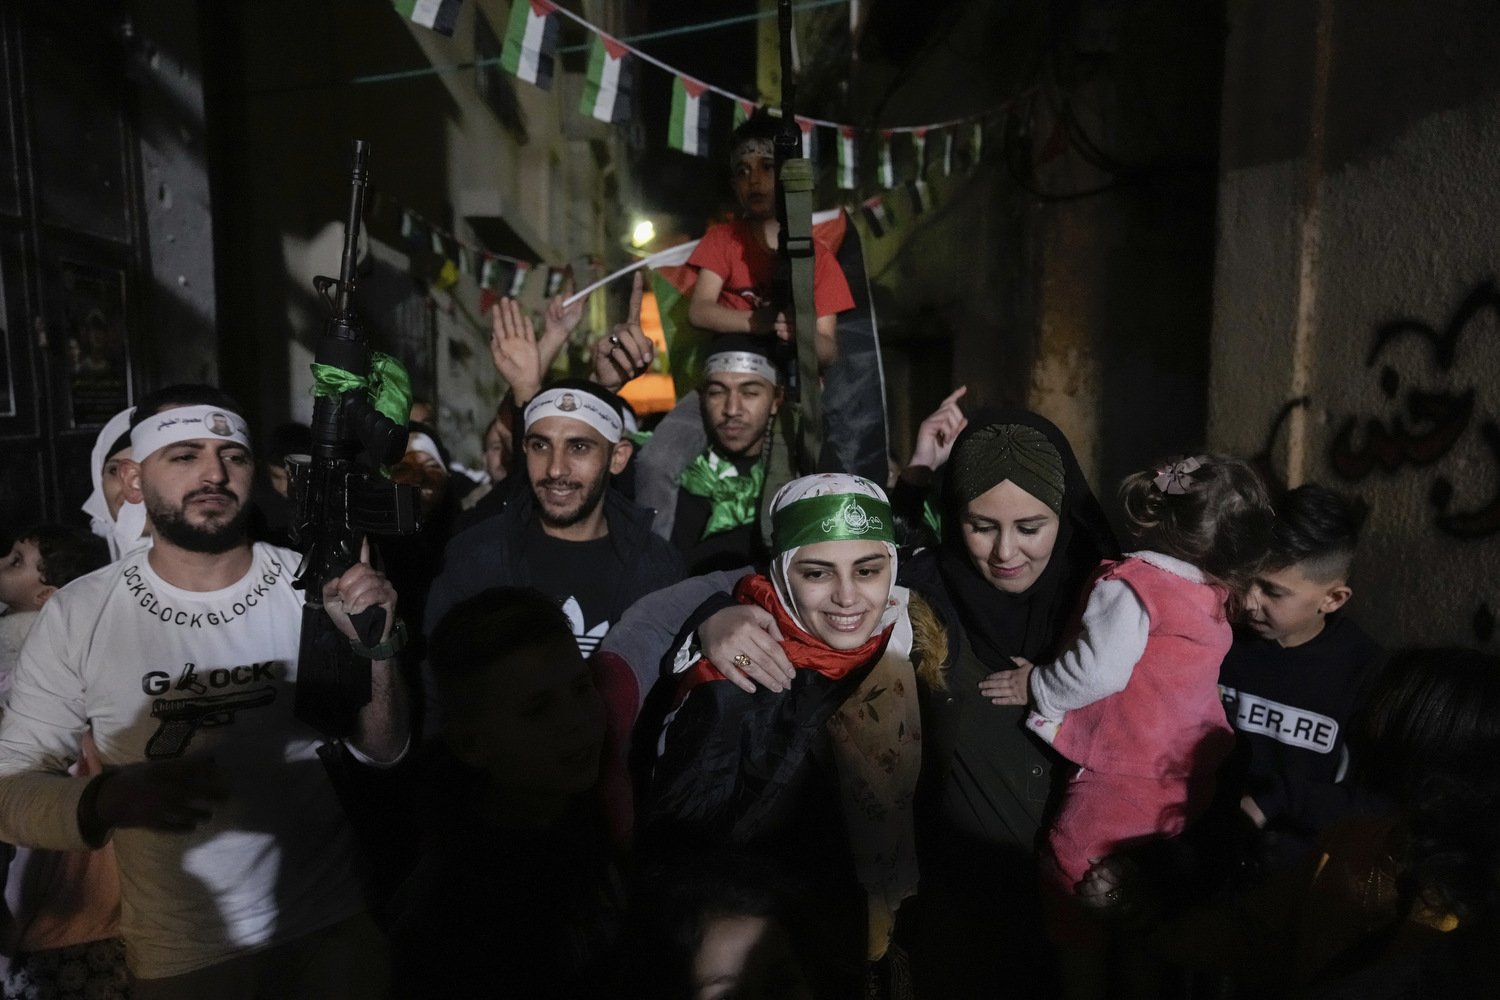  Aseel al-Titi, wearing a Hamas headband, a former Palestinian prisoner who was released by the Israeli authorities, is greeted by friends and family members in Balata, a Palestinian refugee camp in Nablus, West Bank, Friday, Nov. 24, 2023.  Photo by